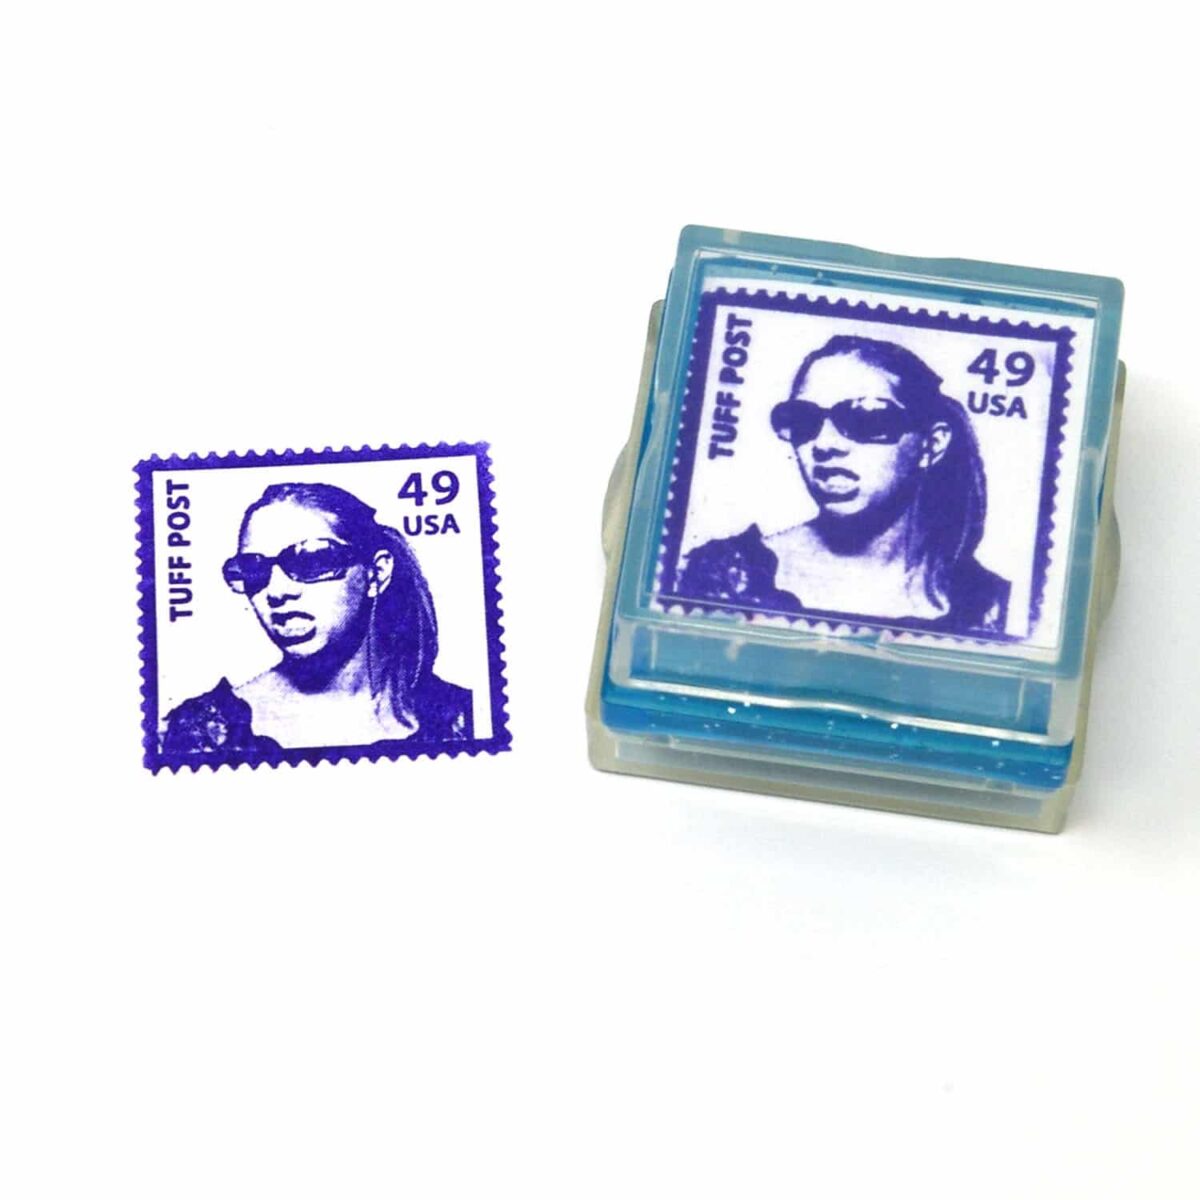 US Postage Rubber Stamp